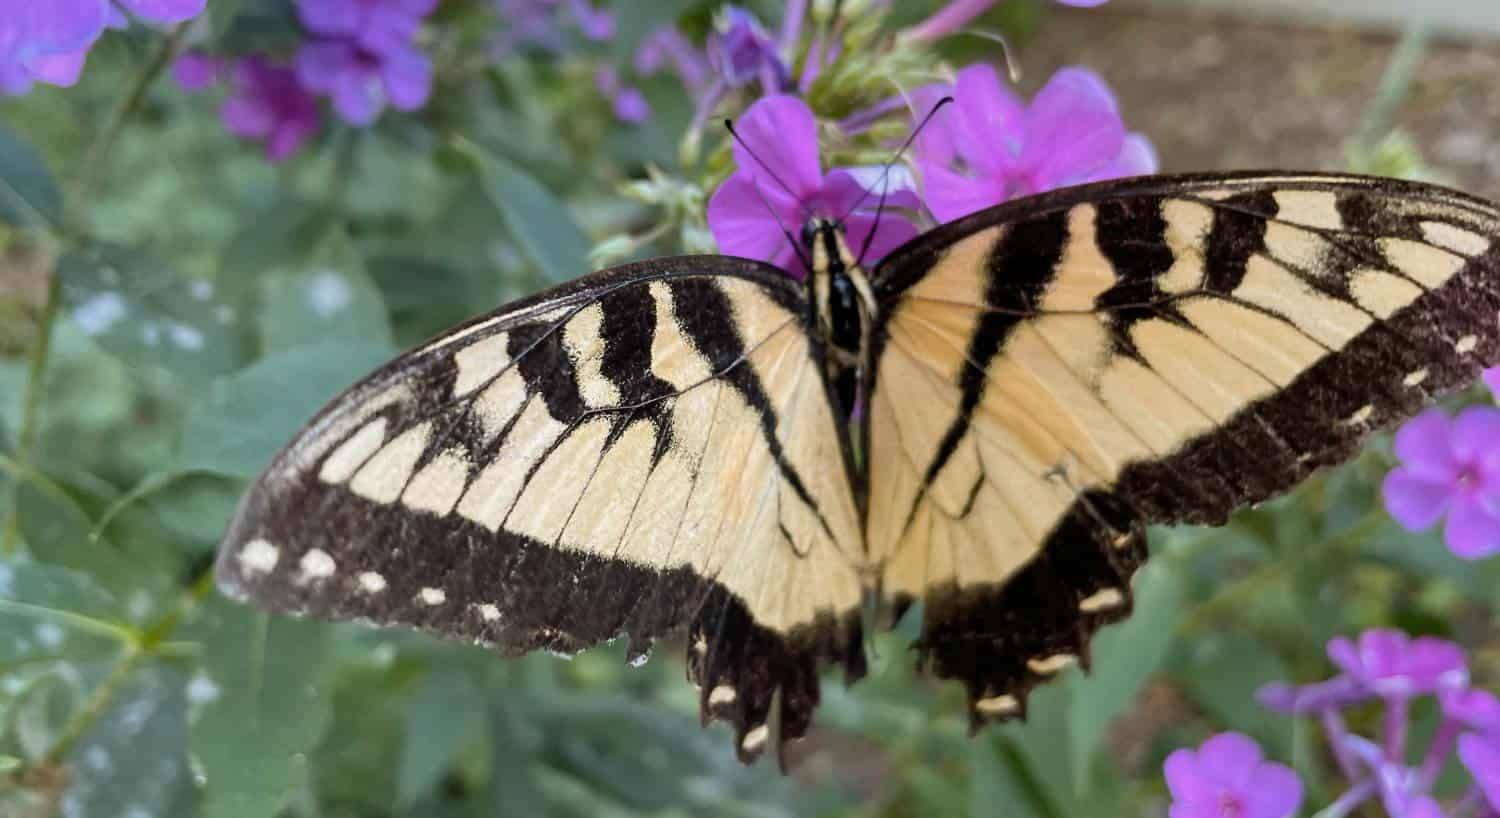 Close up view of yellow and black butterfly sitting on a purple flower